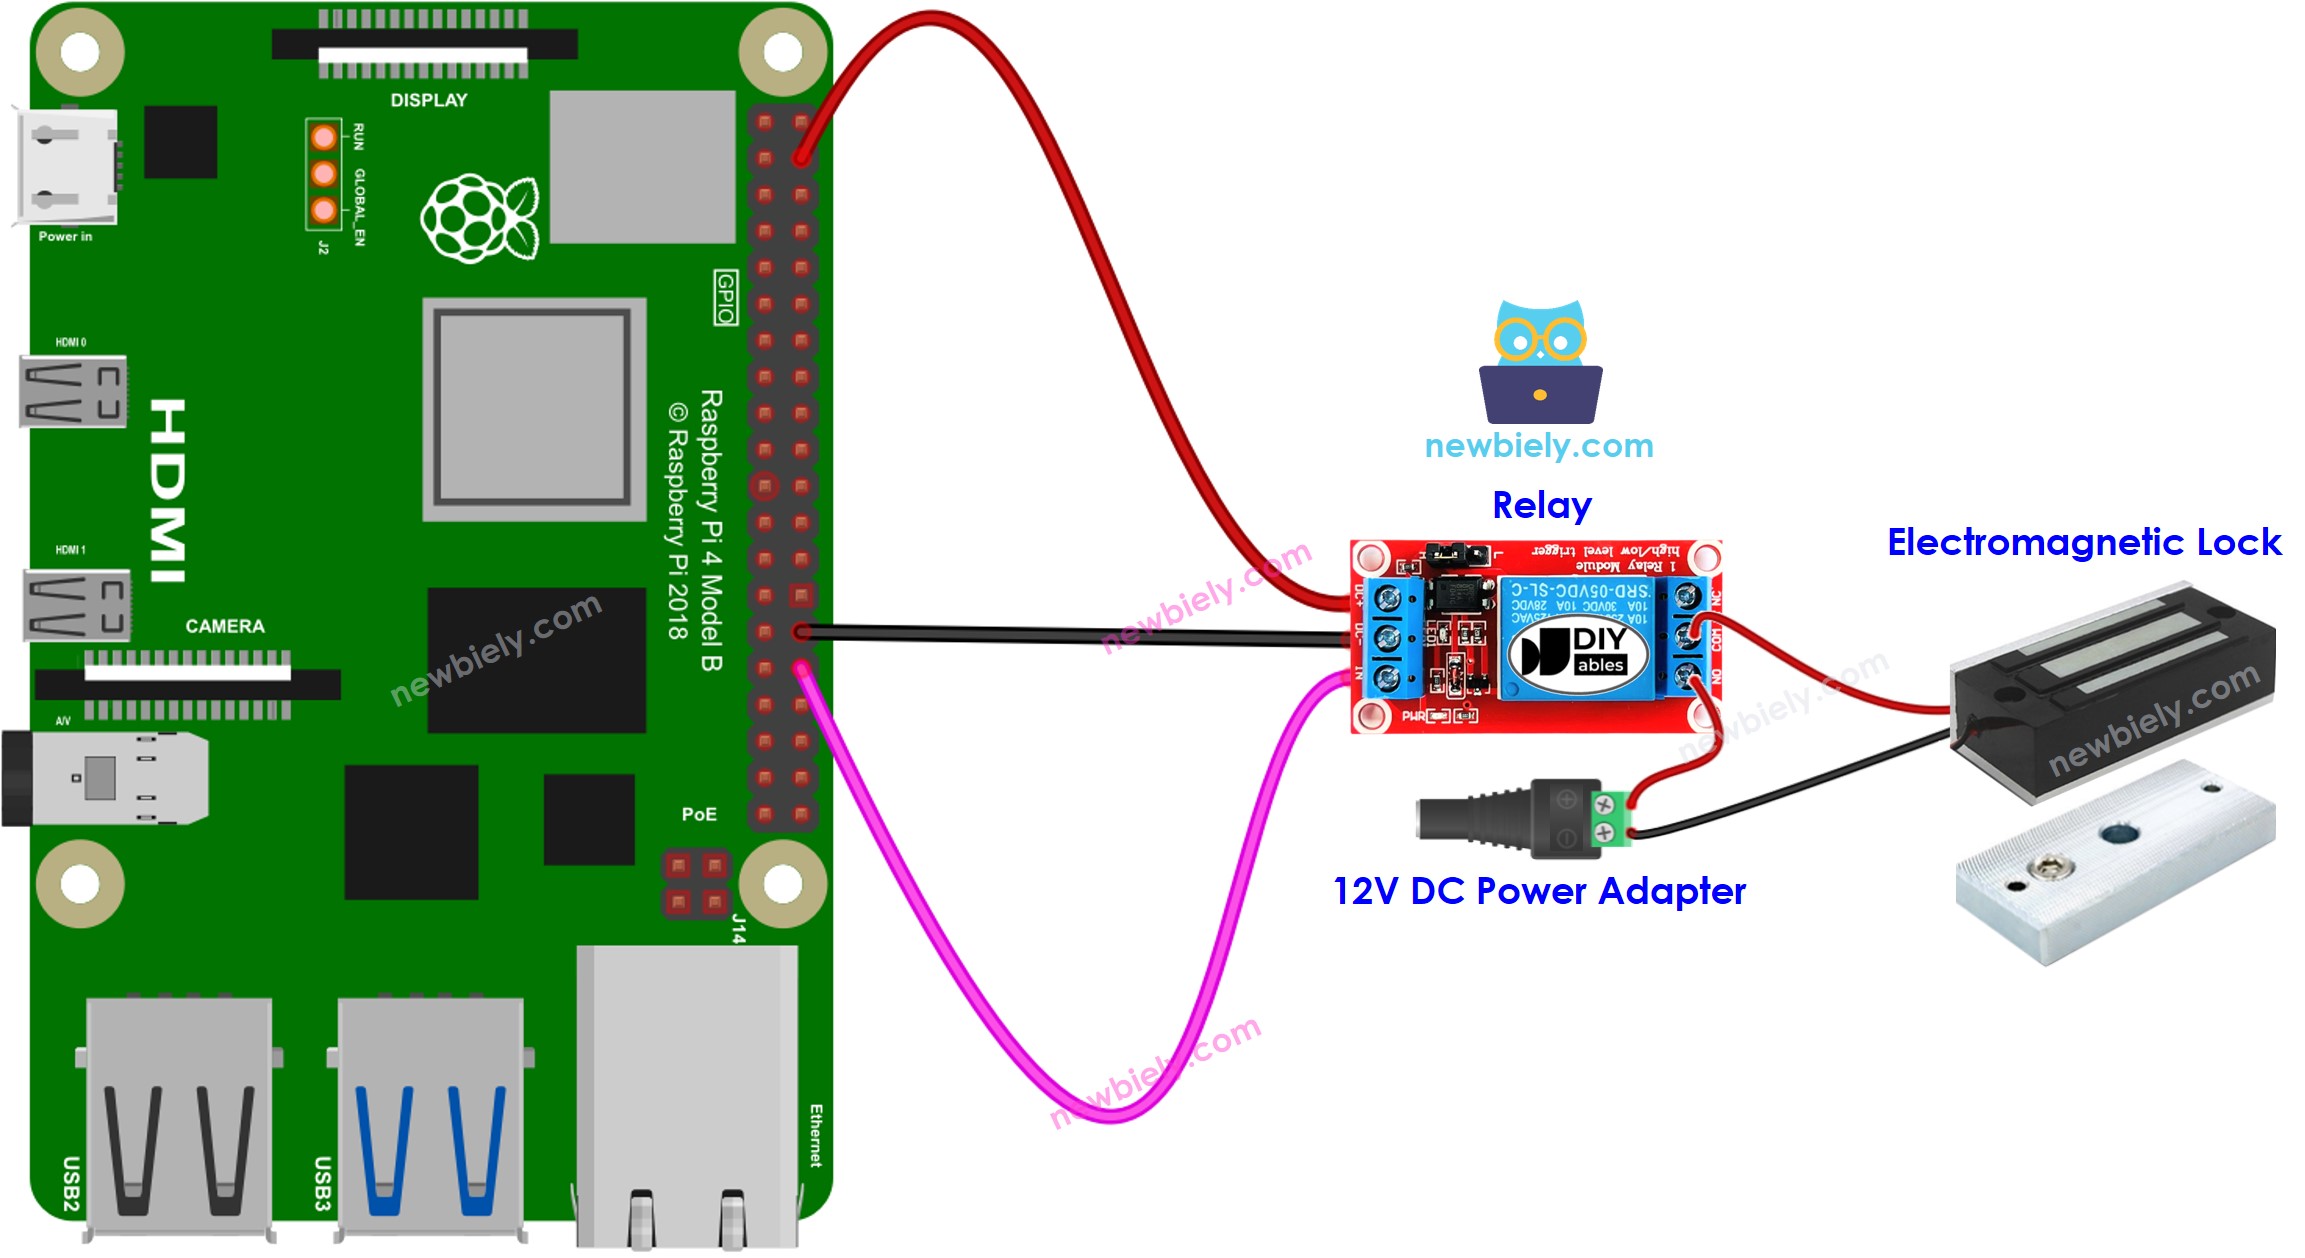 The wiring diagram between Raspberry Pi and electromagnetic lock